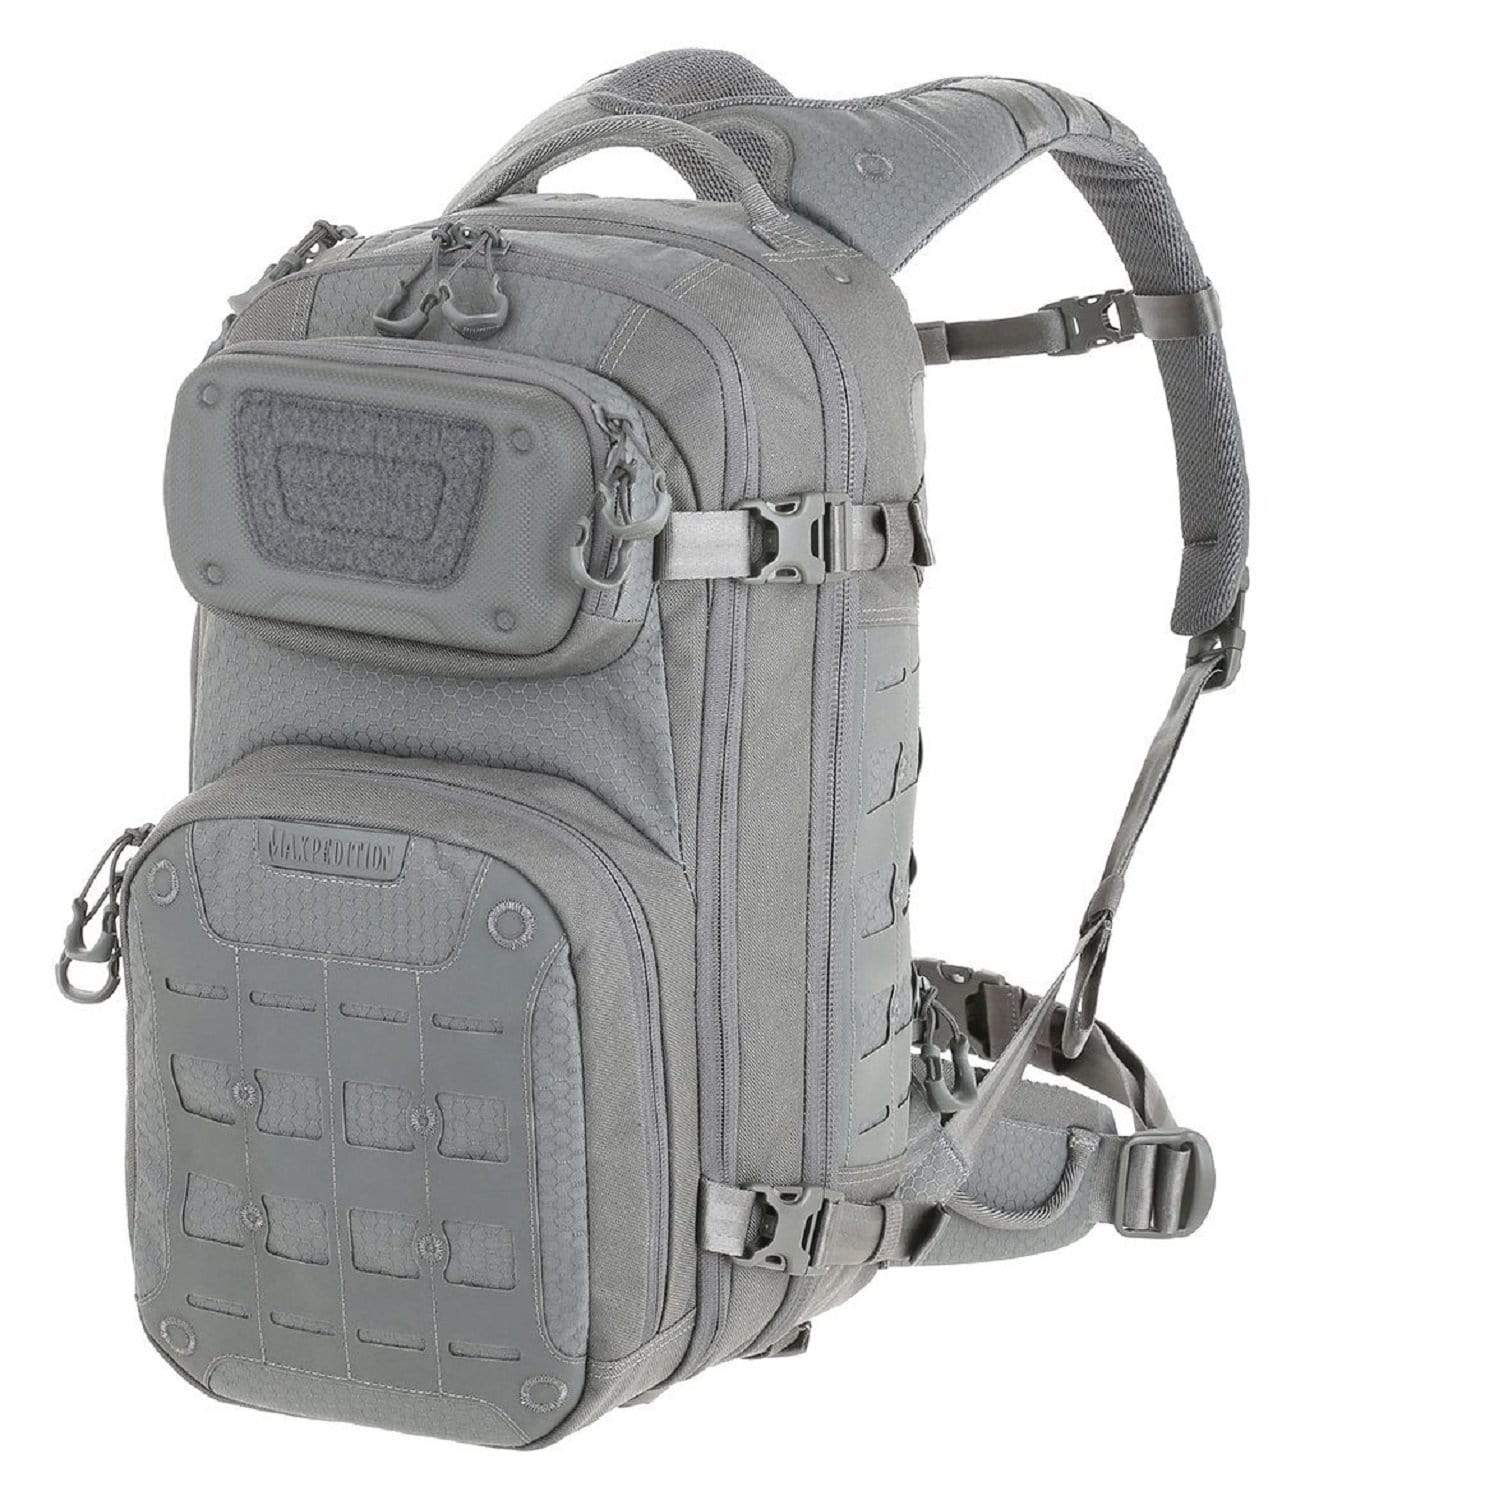 Maxpedition Camping & Outdoor : Backpacks & Gearbags Maxpedition Riftcore CCW-Enabled Backpack 23L Gray